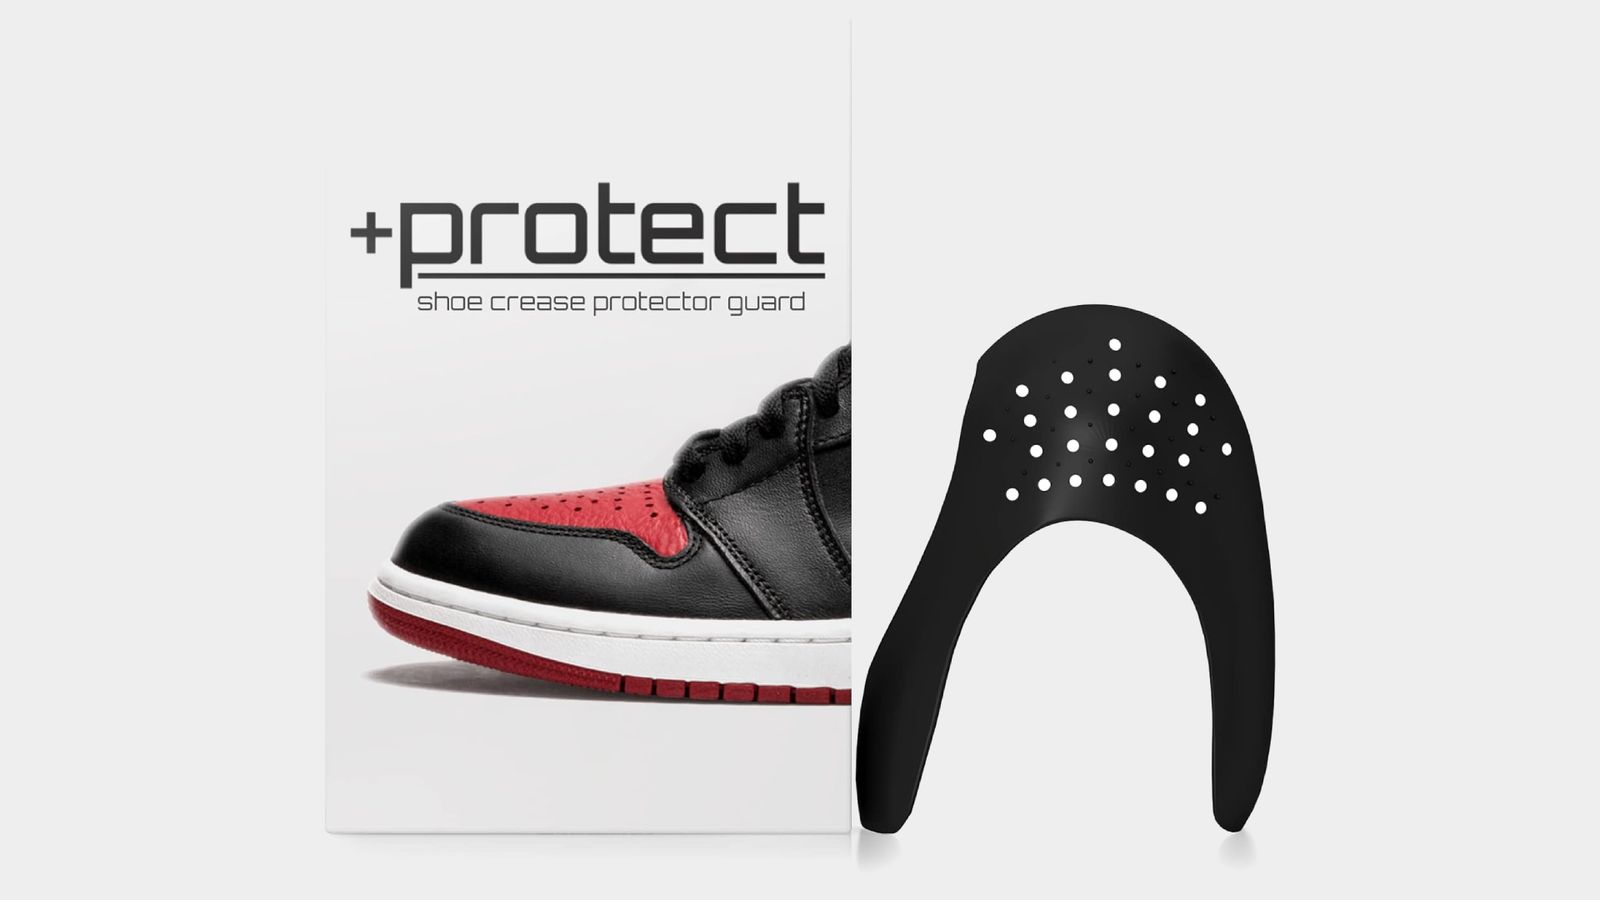 +Protect Crease Guards product image of a black crease protector next to a white box.